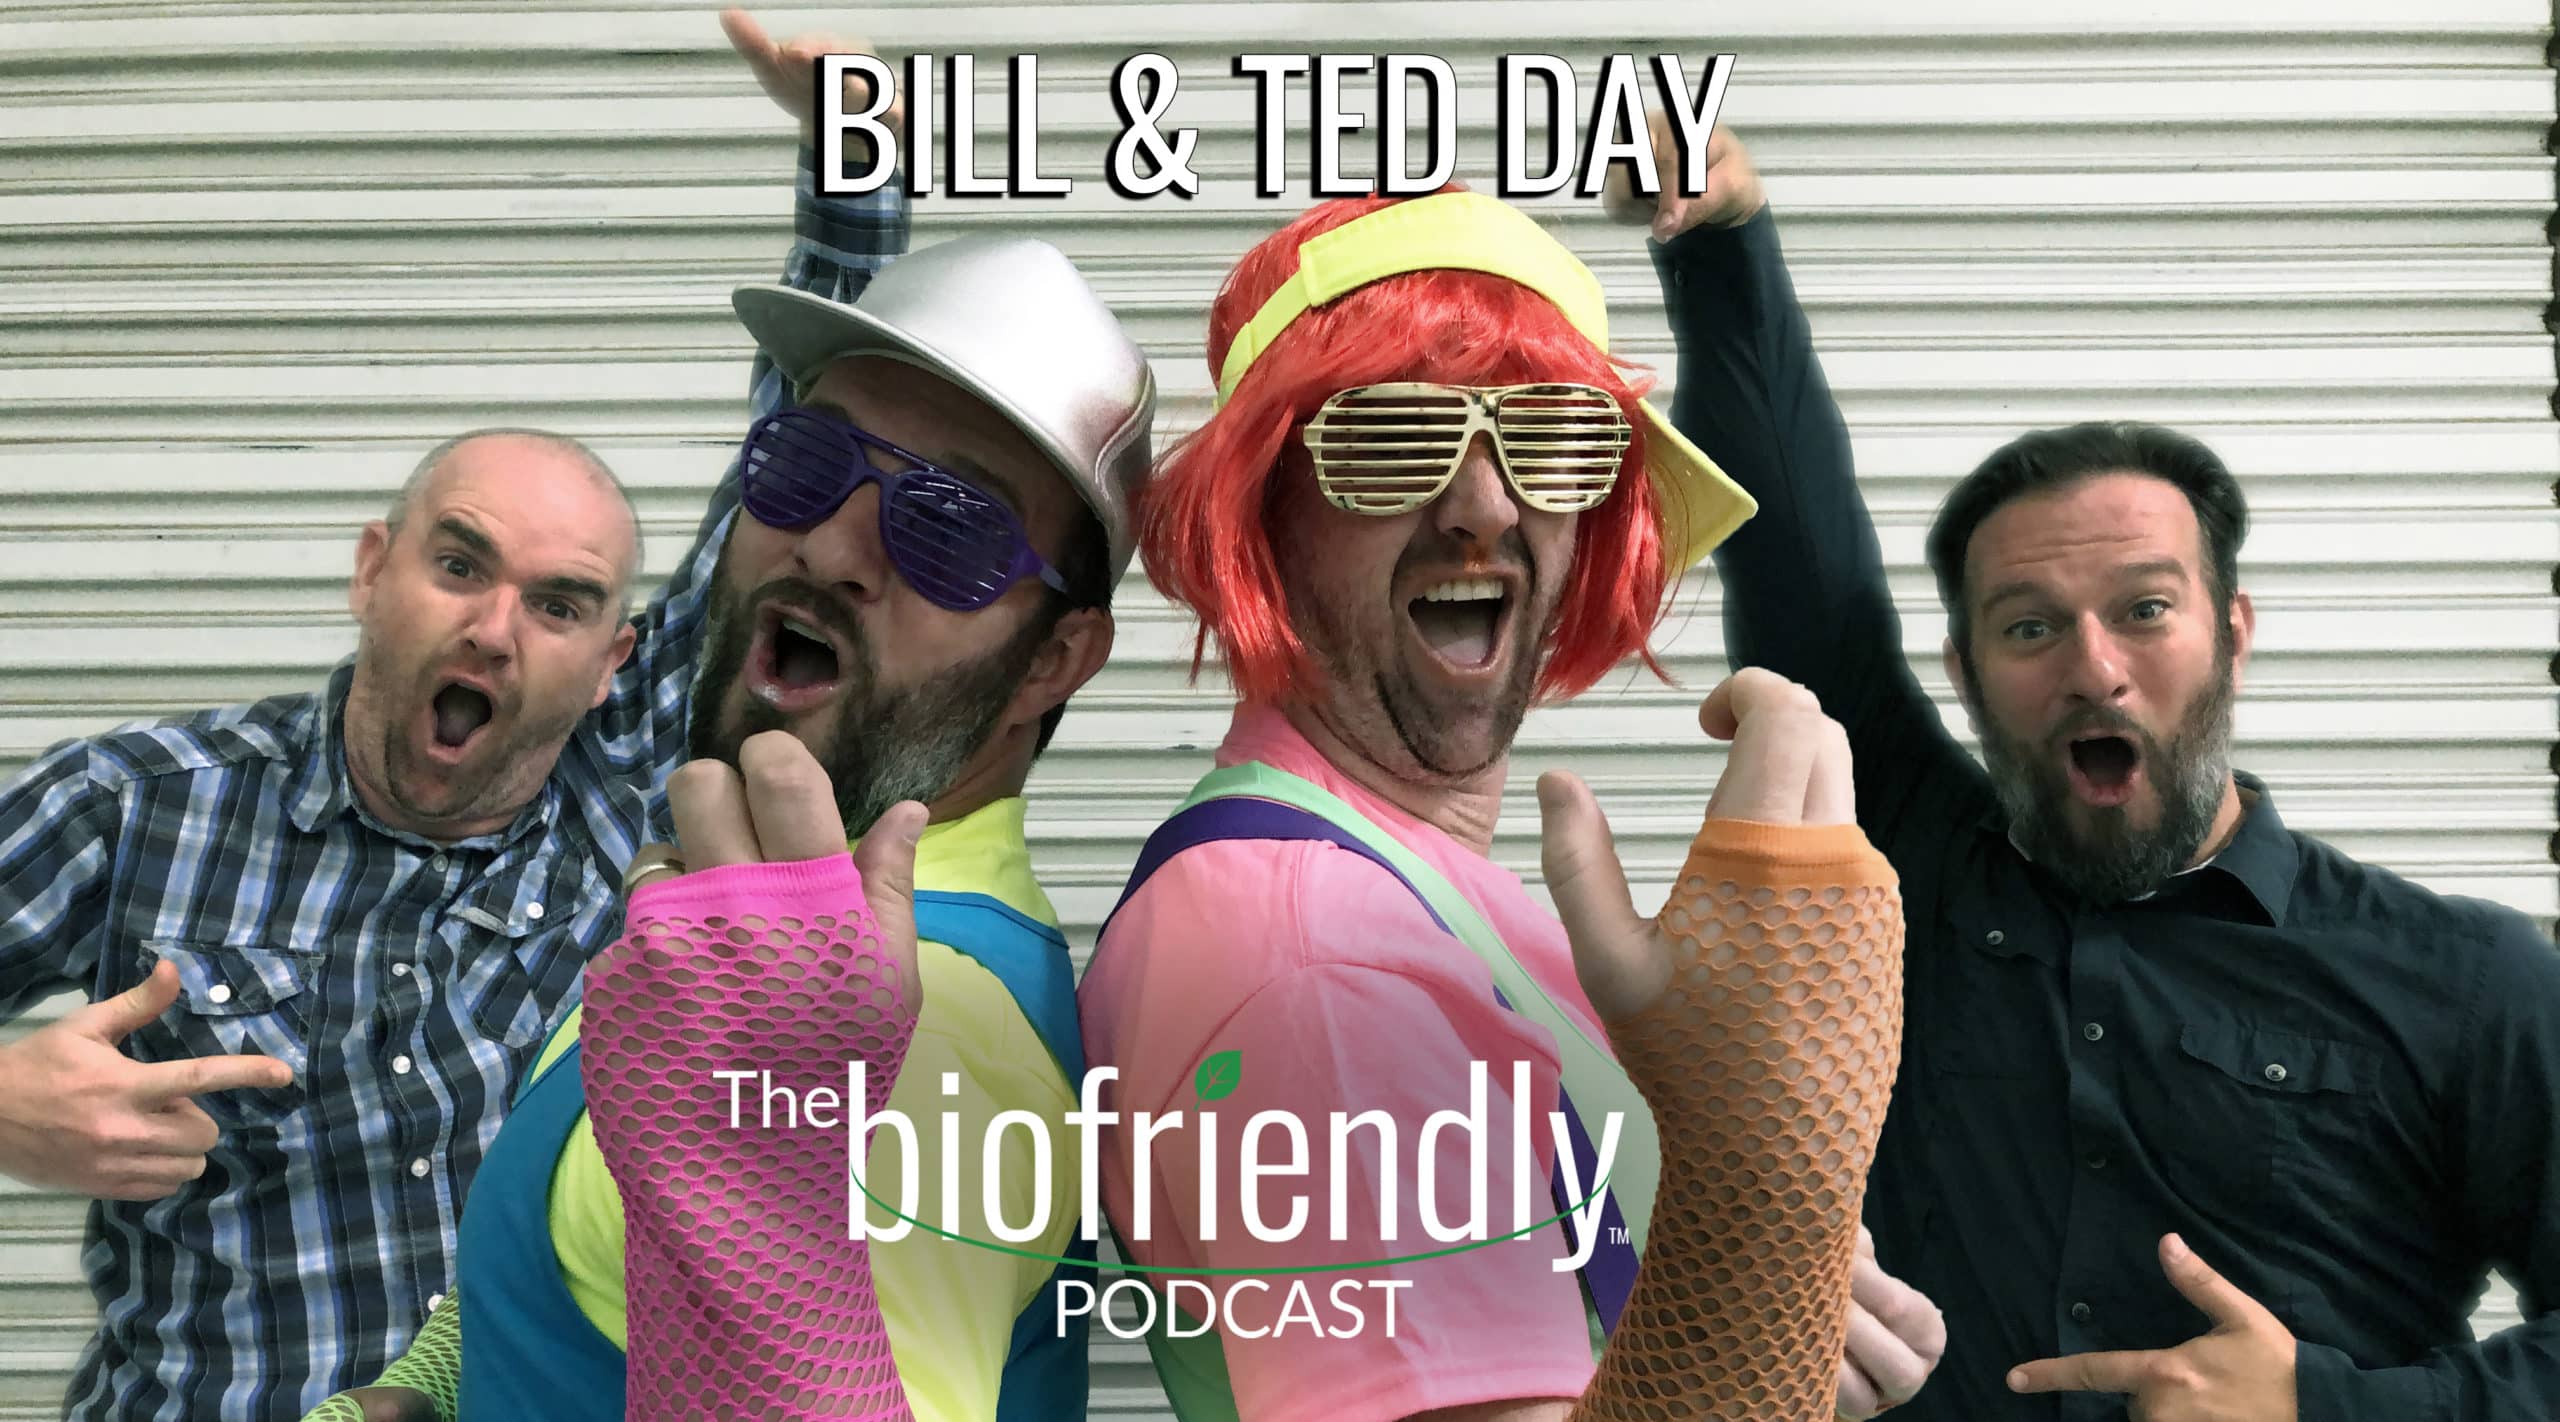 The Biofriendly Podcast - Episode 17 - Bill And Ted Day